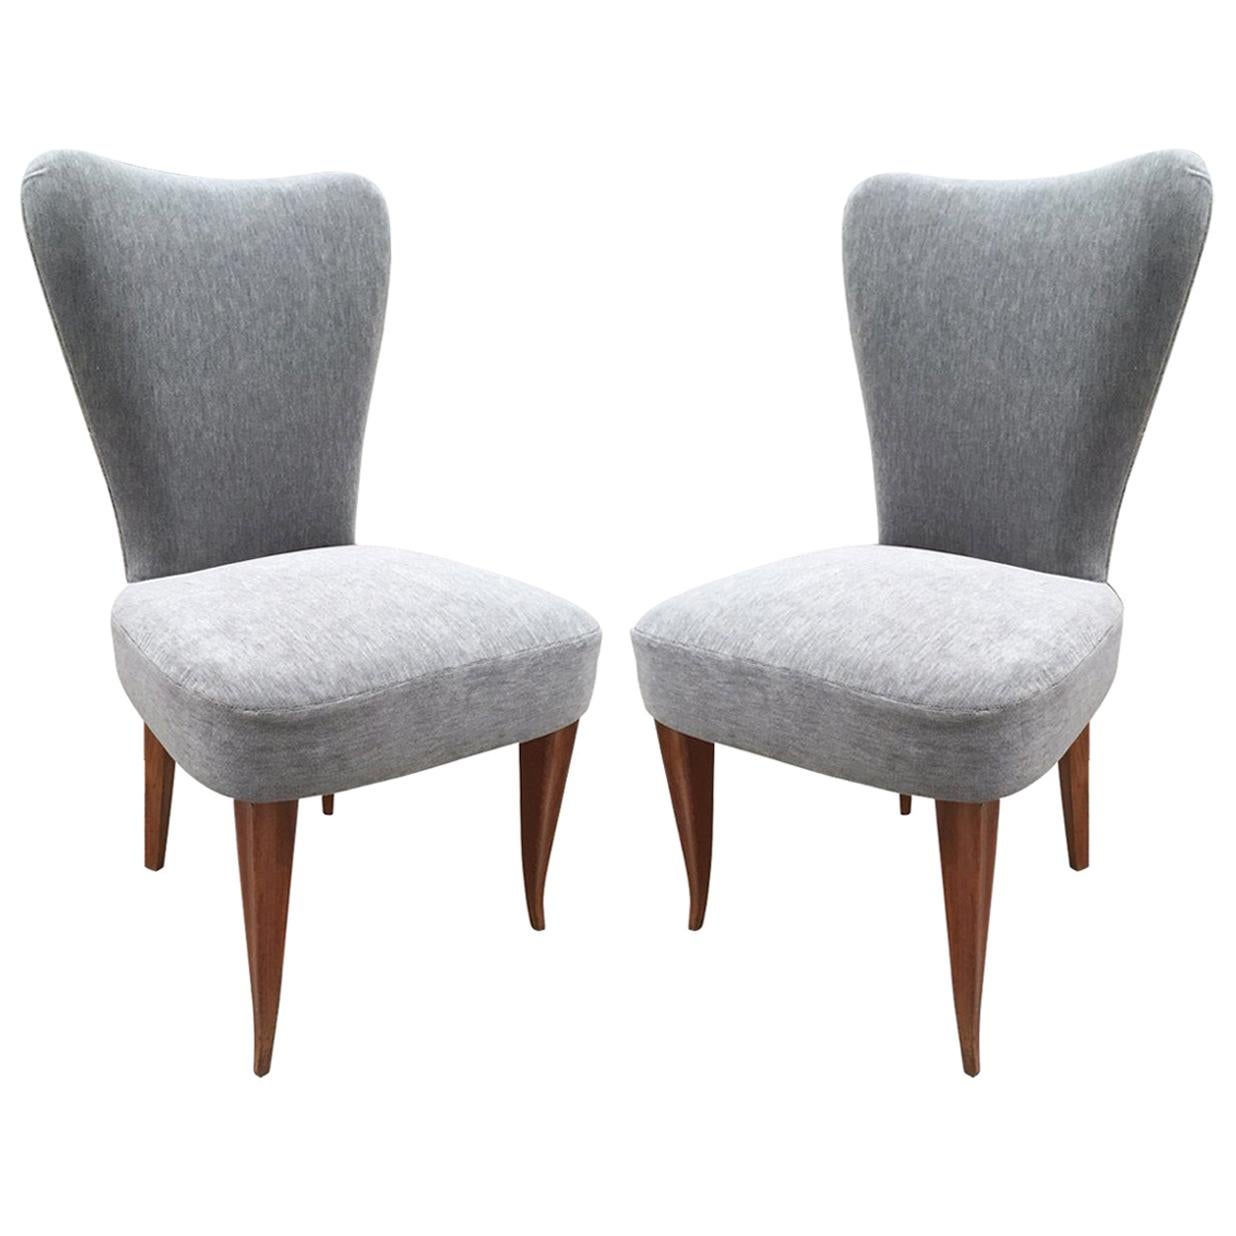 Pair of French Art Deco Side Chairs in Mohair